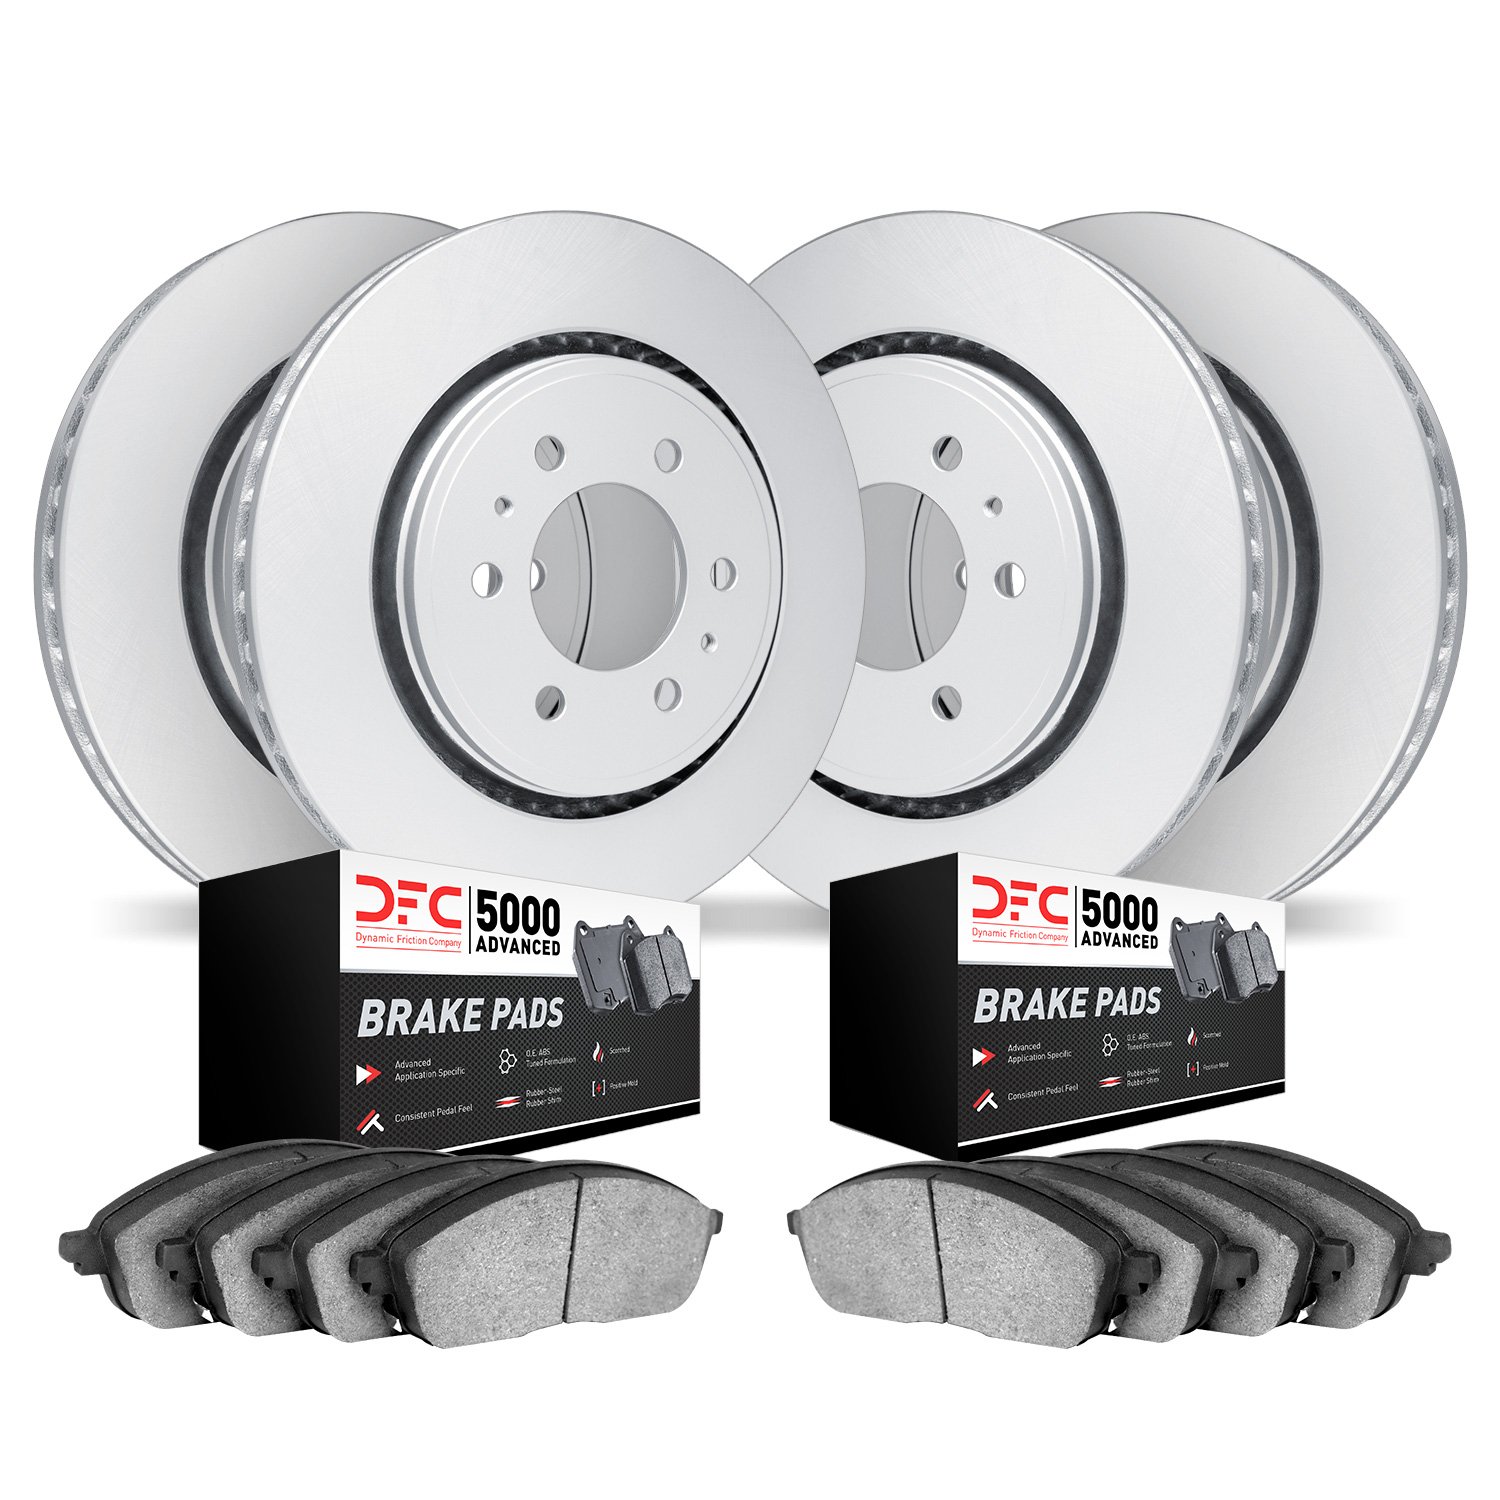 4504-46046 Geospec Brake Rotors w/5000 Advanced Brake Pads Kit, 2010-2016 GM, Position: Front and Rear